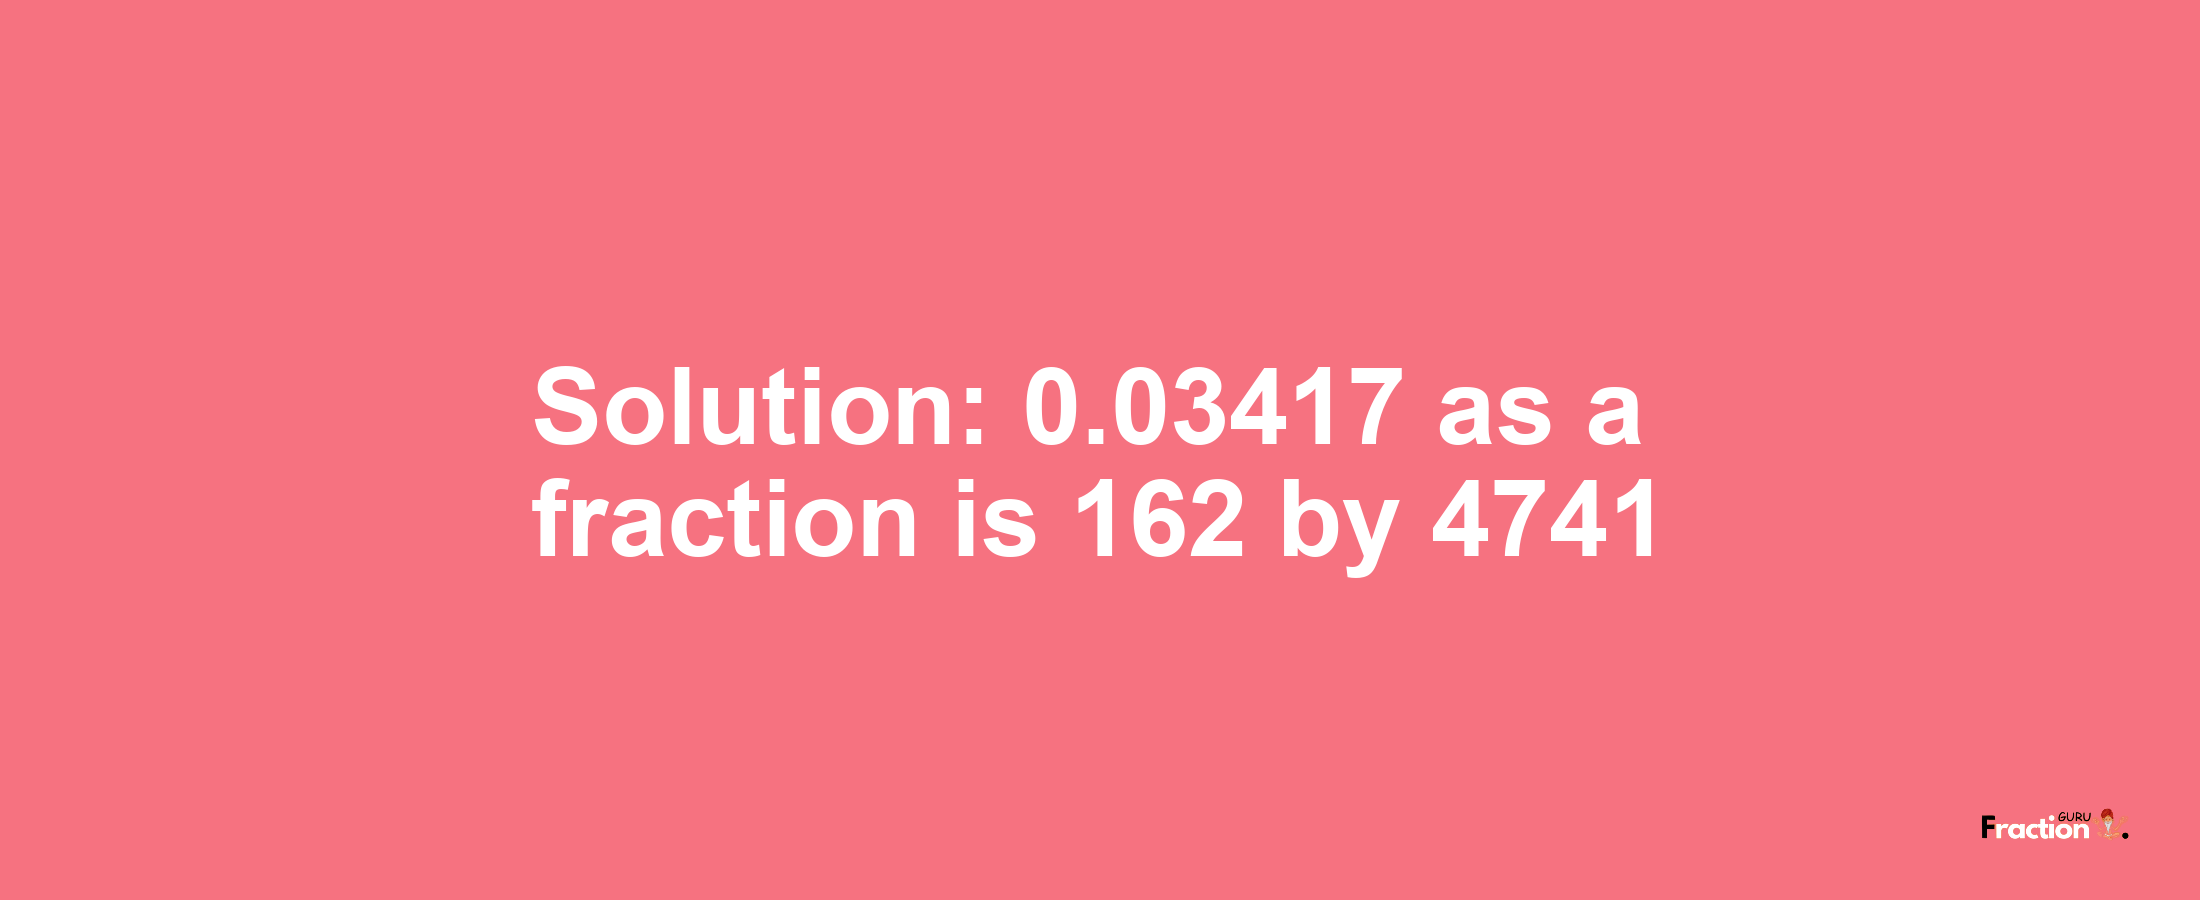 Solution:0.03417 as a fraction is 162/4741